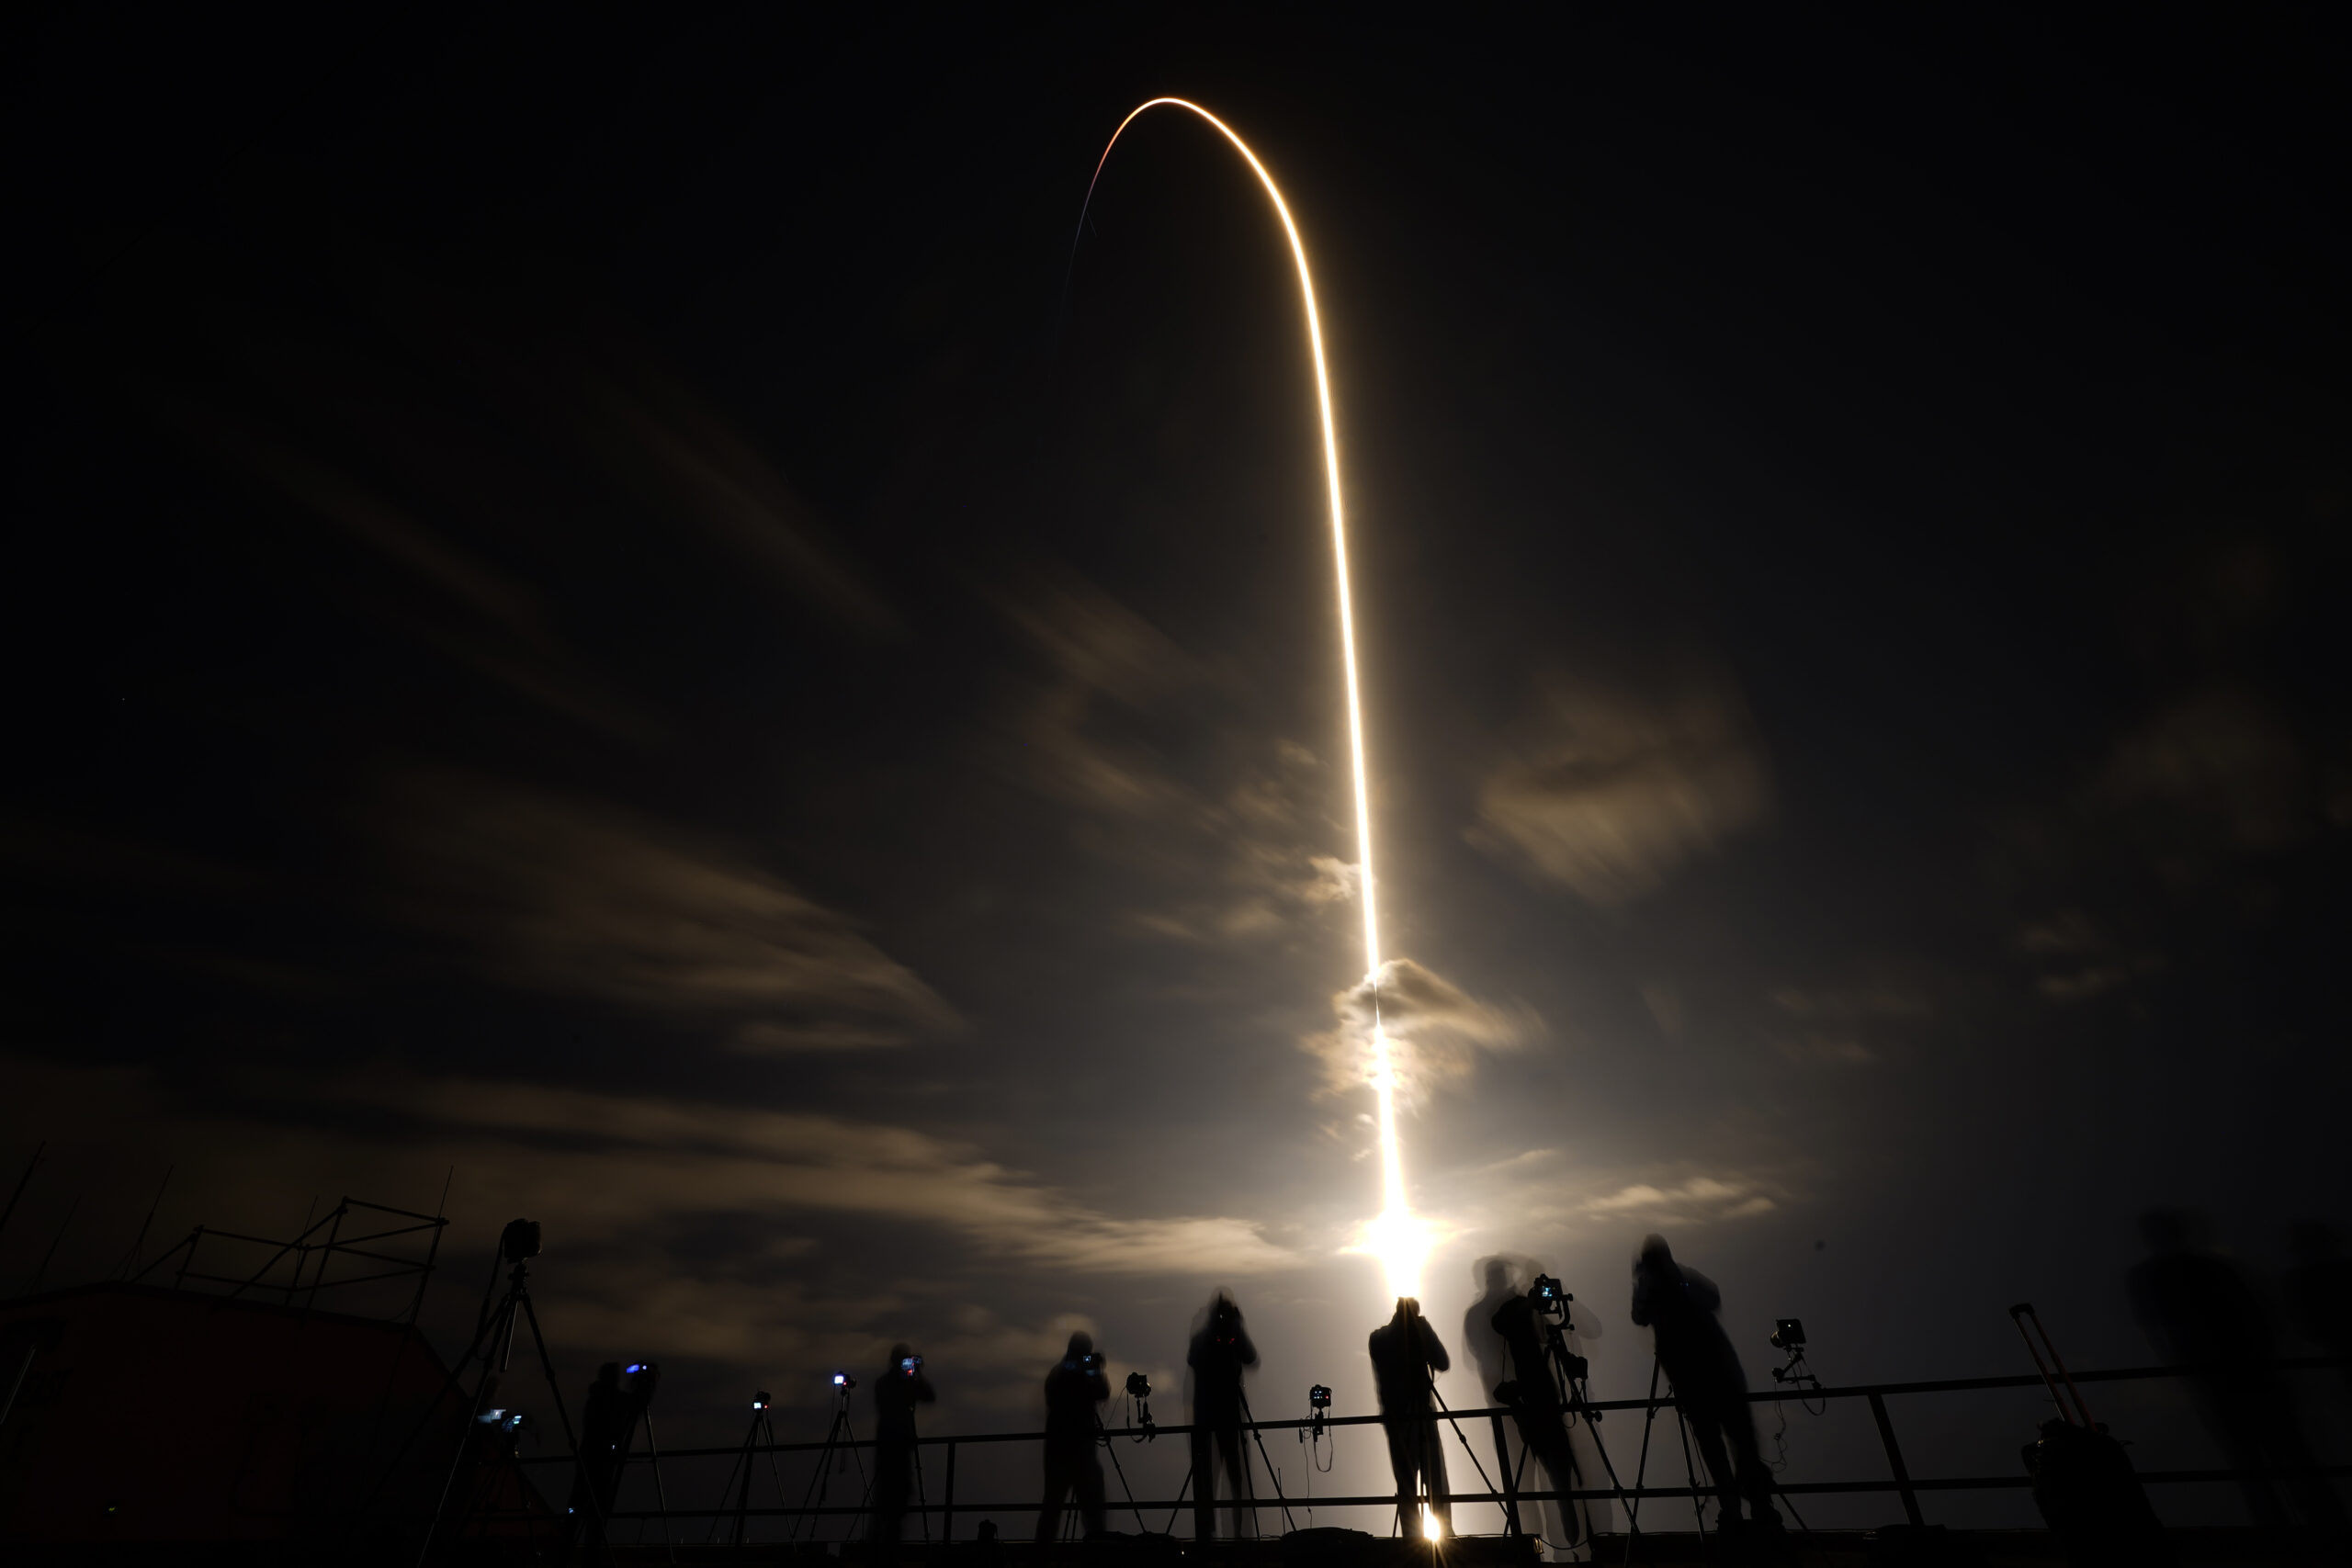 A SpaceX Falcon 9 lifts off in this time exposure from Launch Complex 39A Friday, April 23, 2021, at the Kennedy Space Center in Cape Canaveral, Fla. Four astronauts will fly on the SpaceX Crew-2 mission to the International Space Station. (AP Photo/Chris O'Meara)